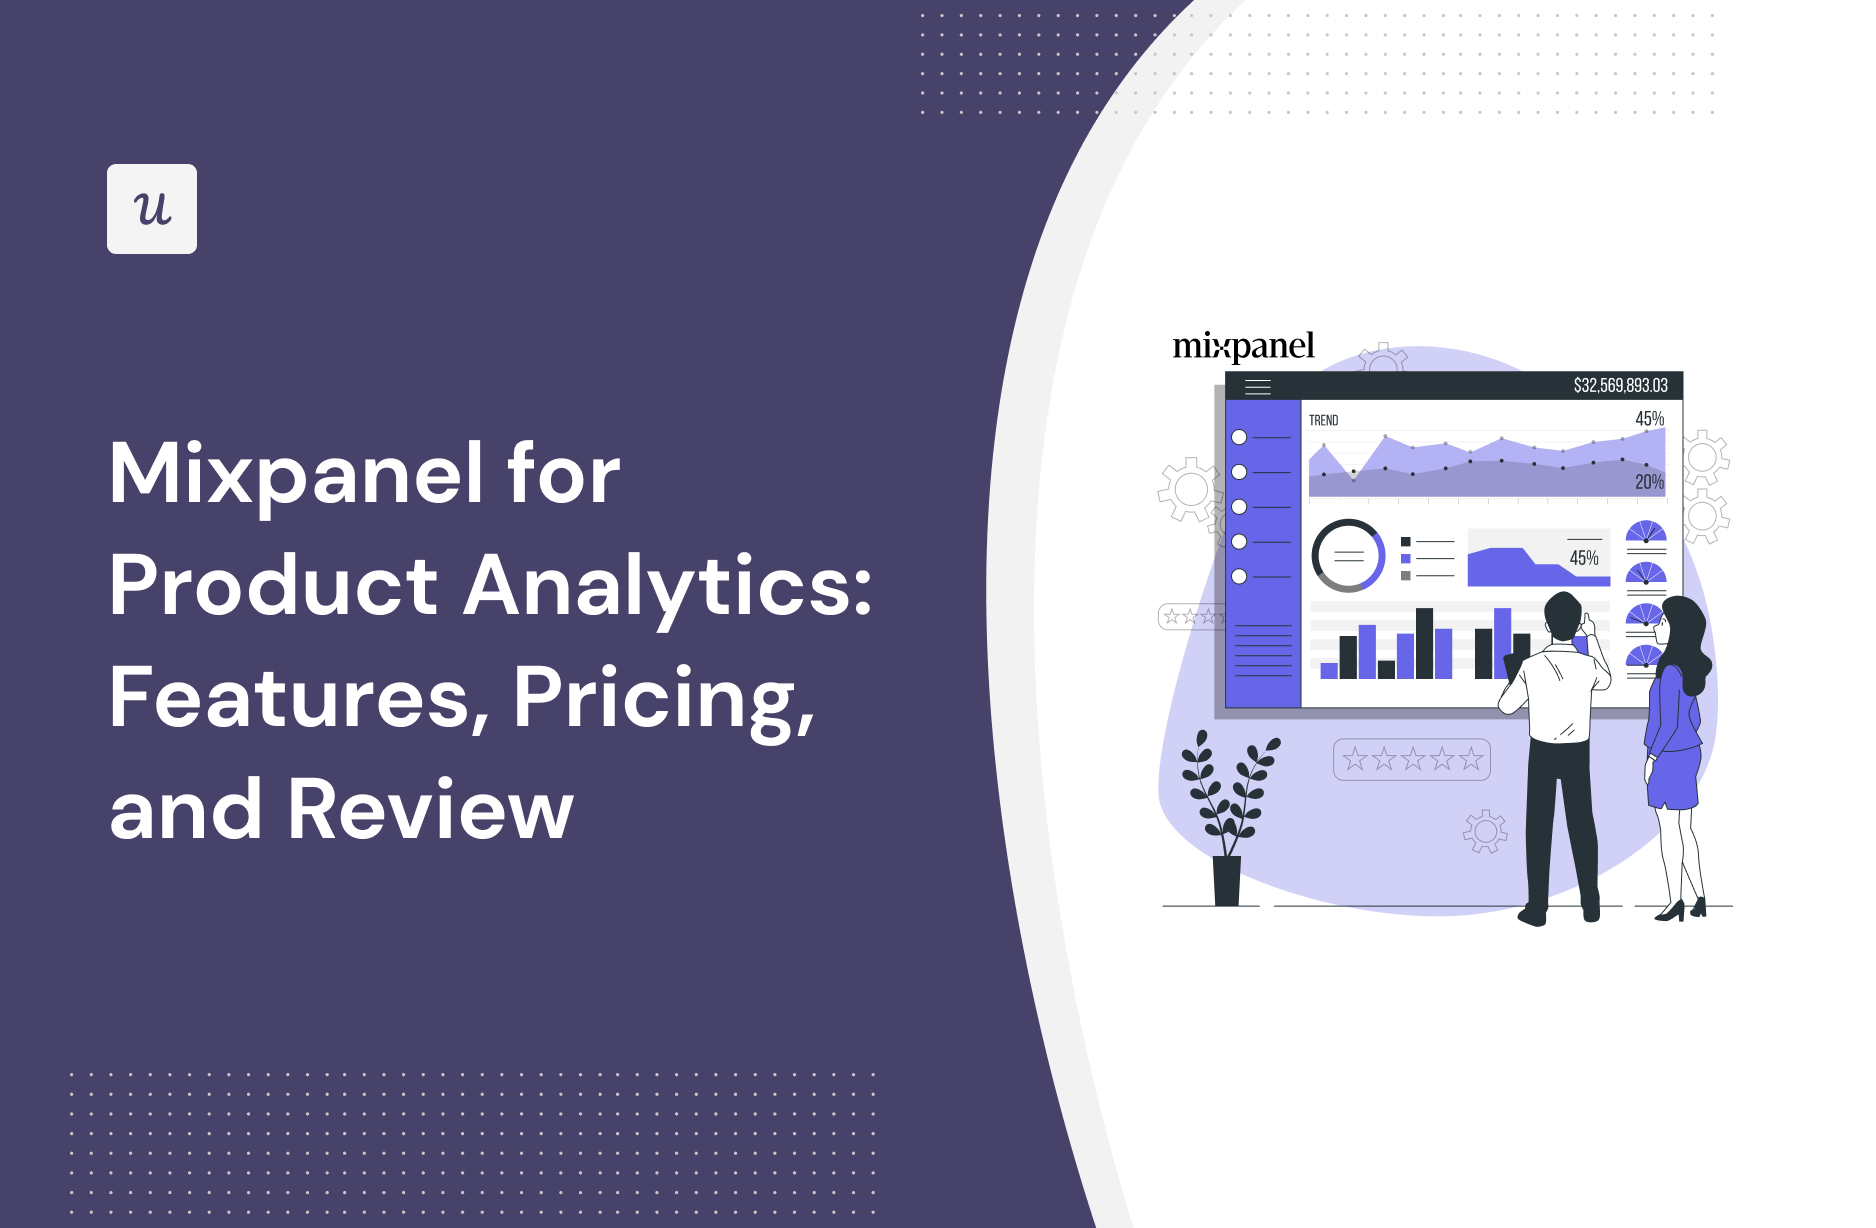 Mixpanel for Product Analytics: Features, Pricing, and Review